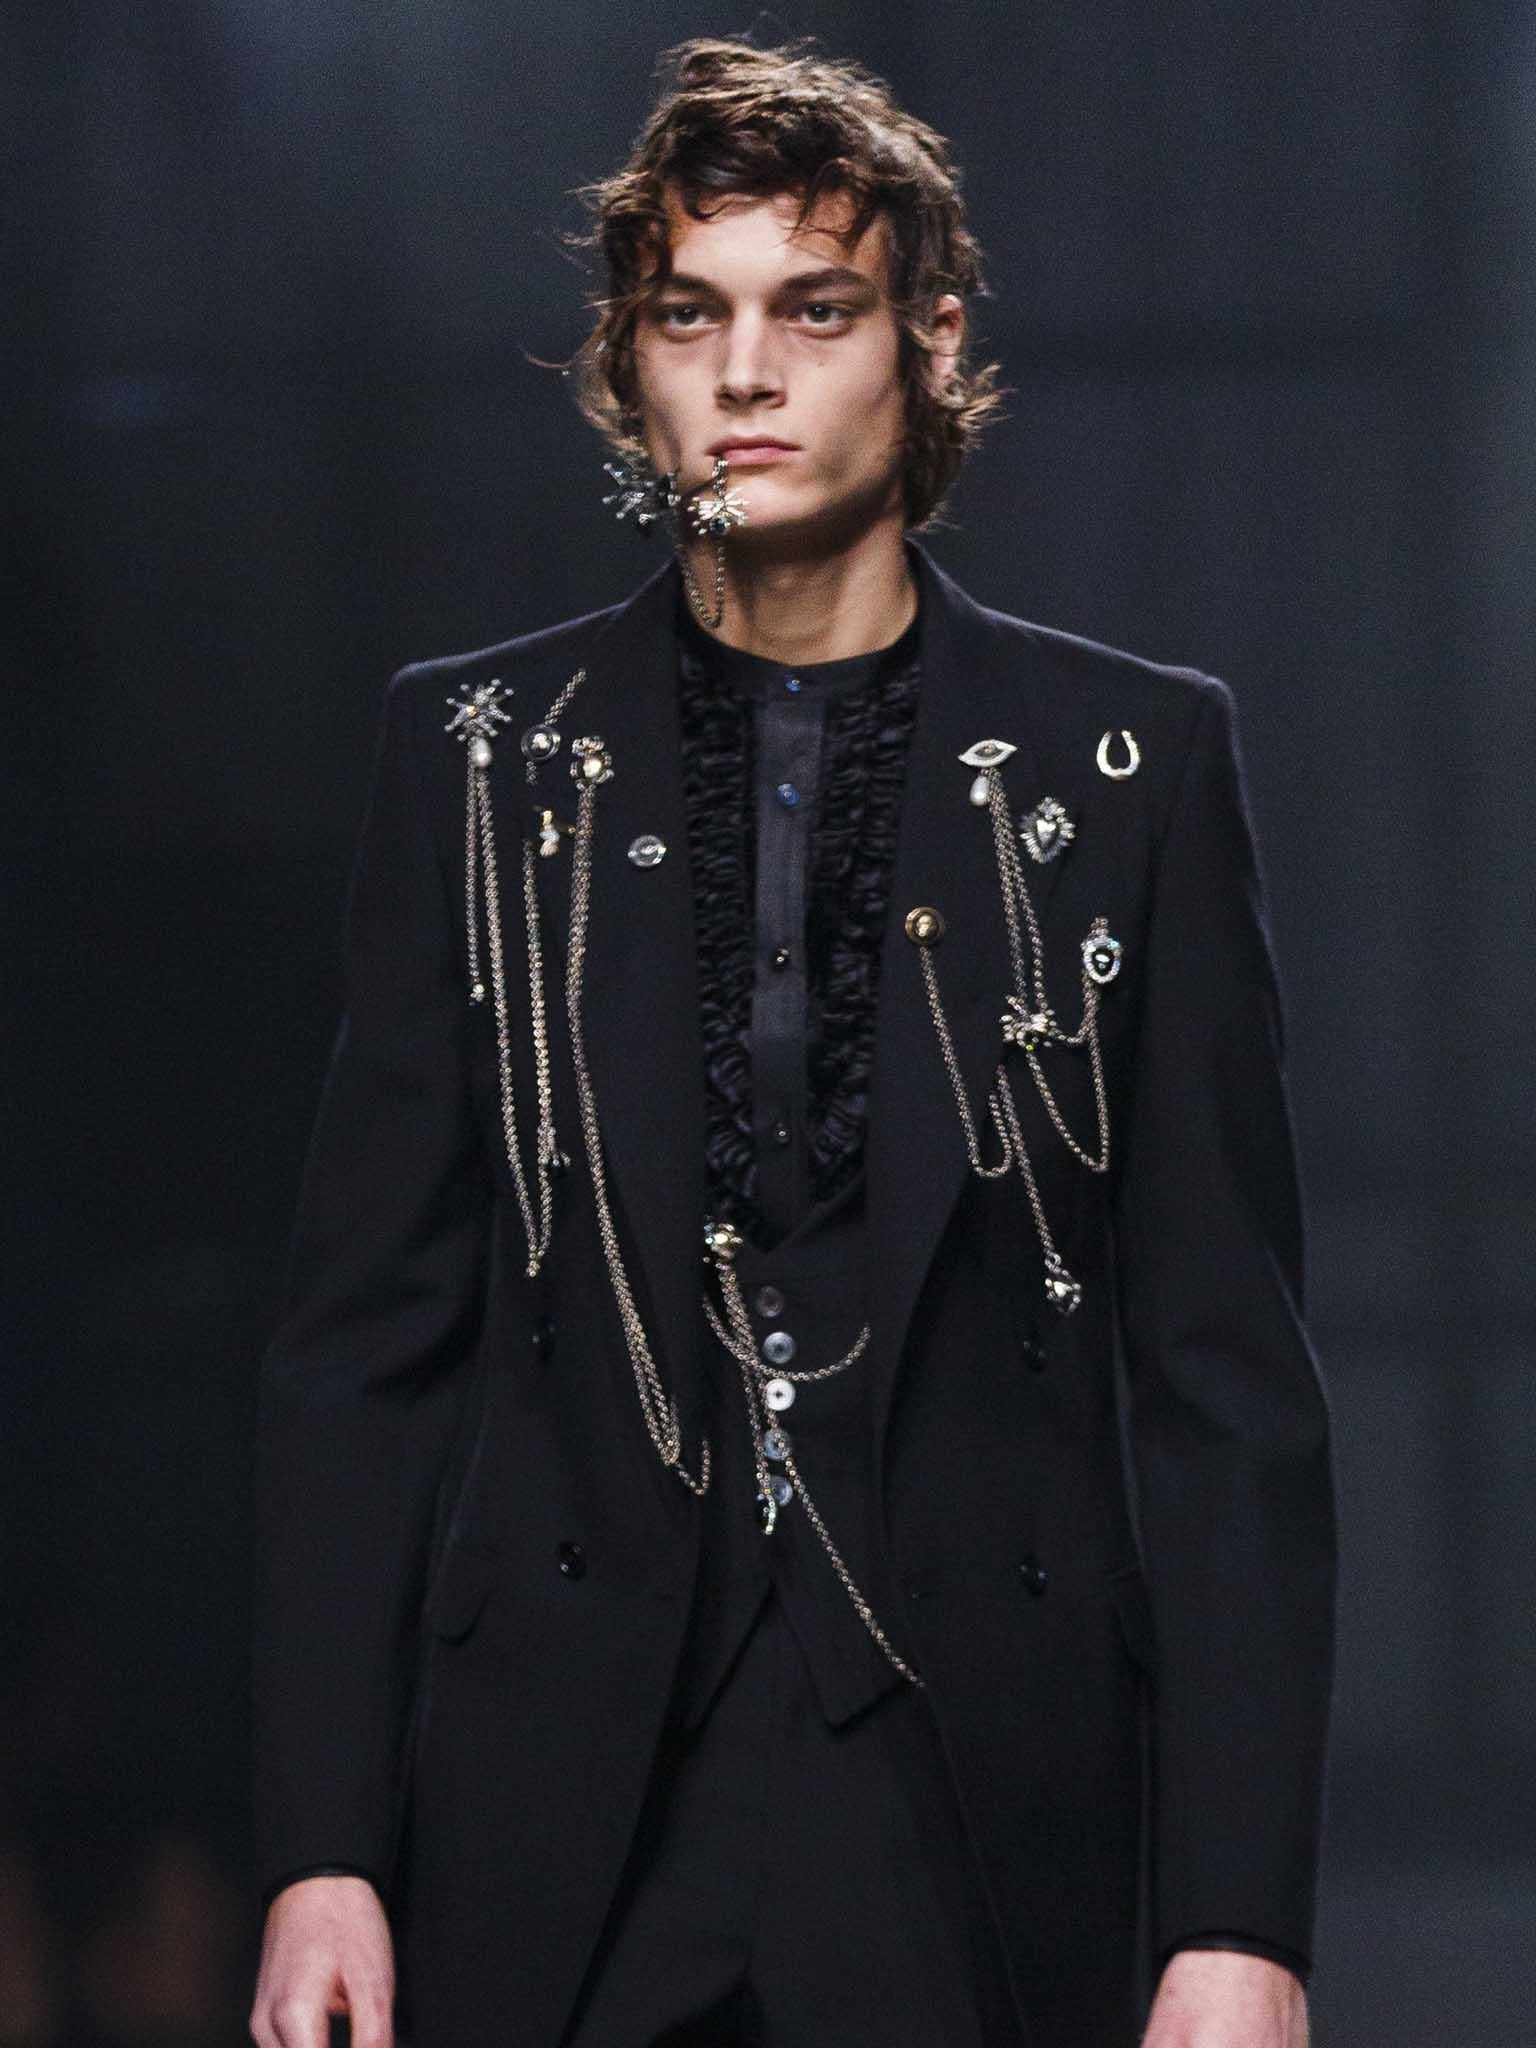 Alexander McQueen Autumn Winter 2016 line puts a fashion spin on military decoration (Getty)